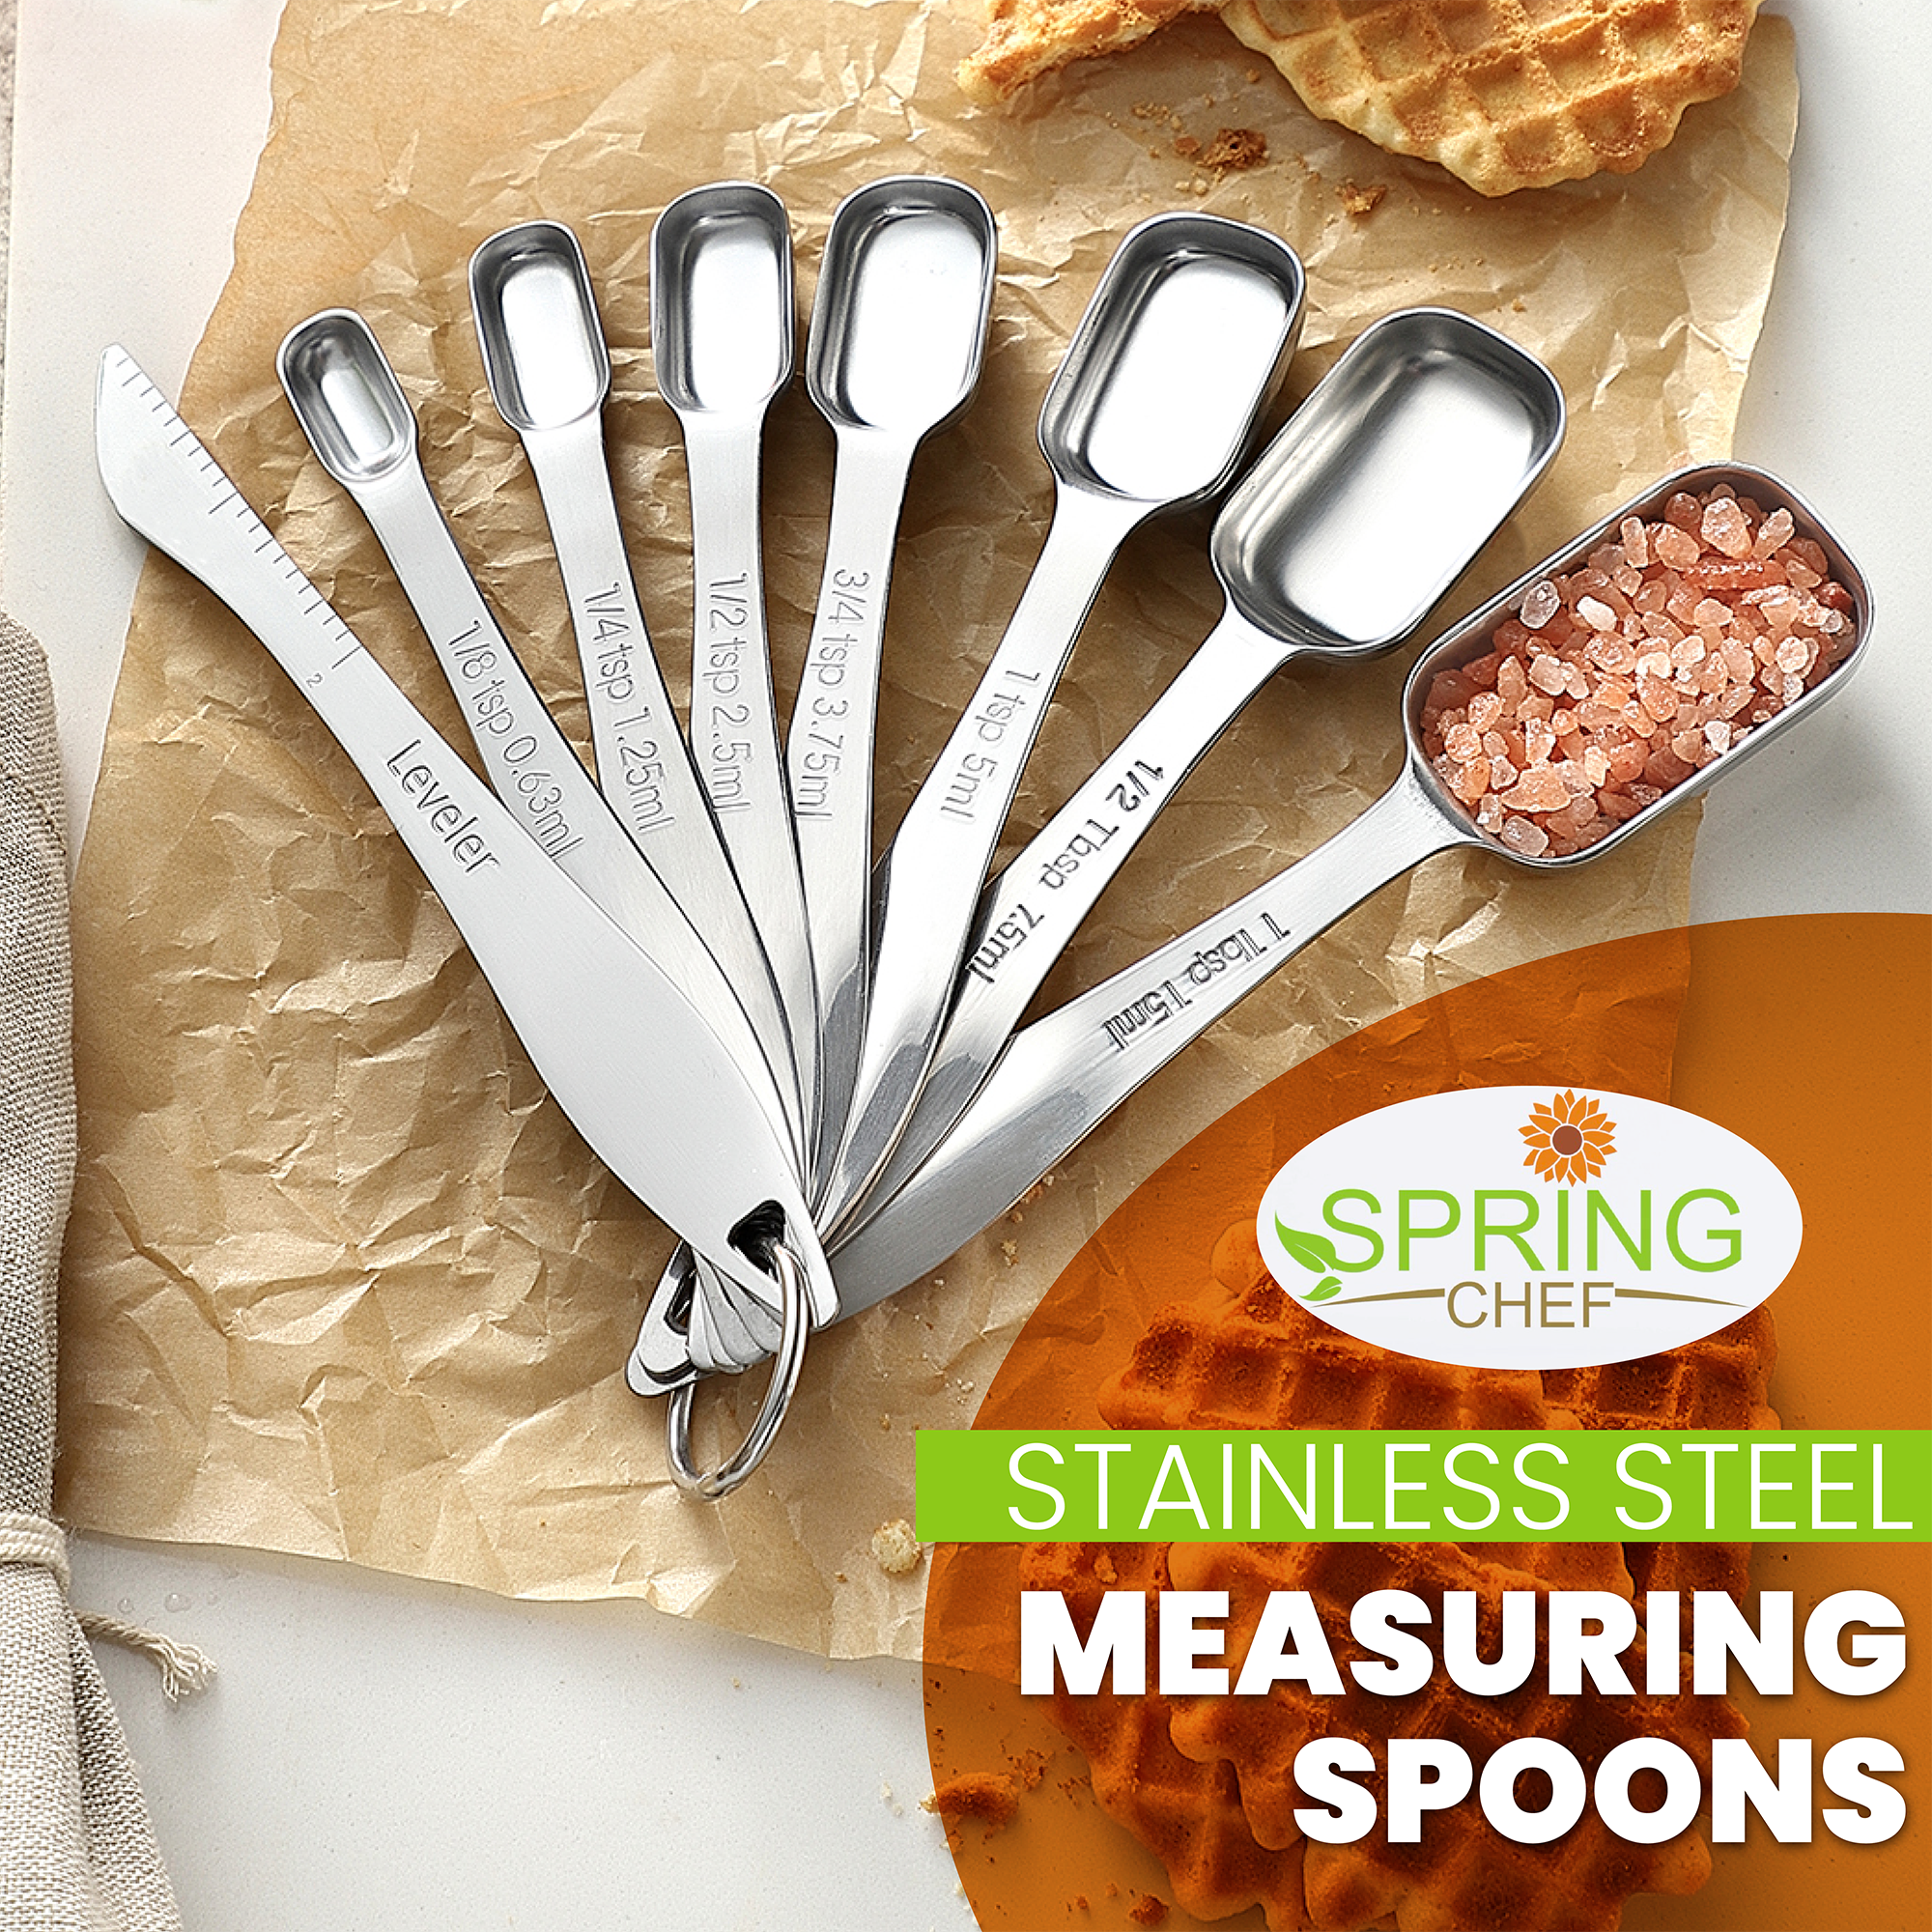 Spring Chef - Oval Measuring Spoons Set of 7 & Measuring Cups Set of 7  Bundle. Easy to Read Measurement Markings For Measures Dry and Liquid